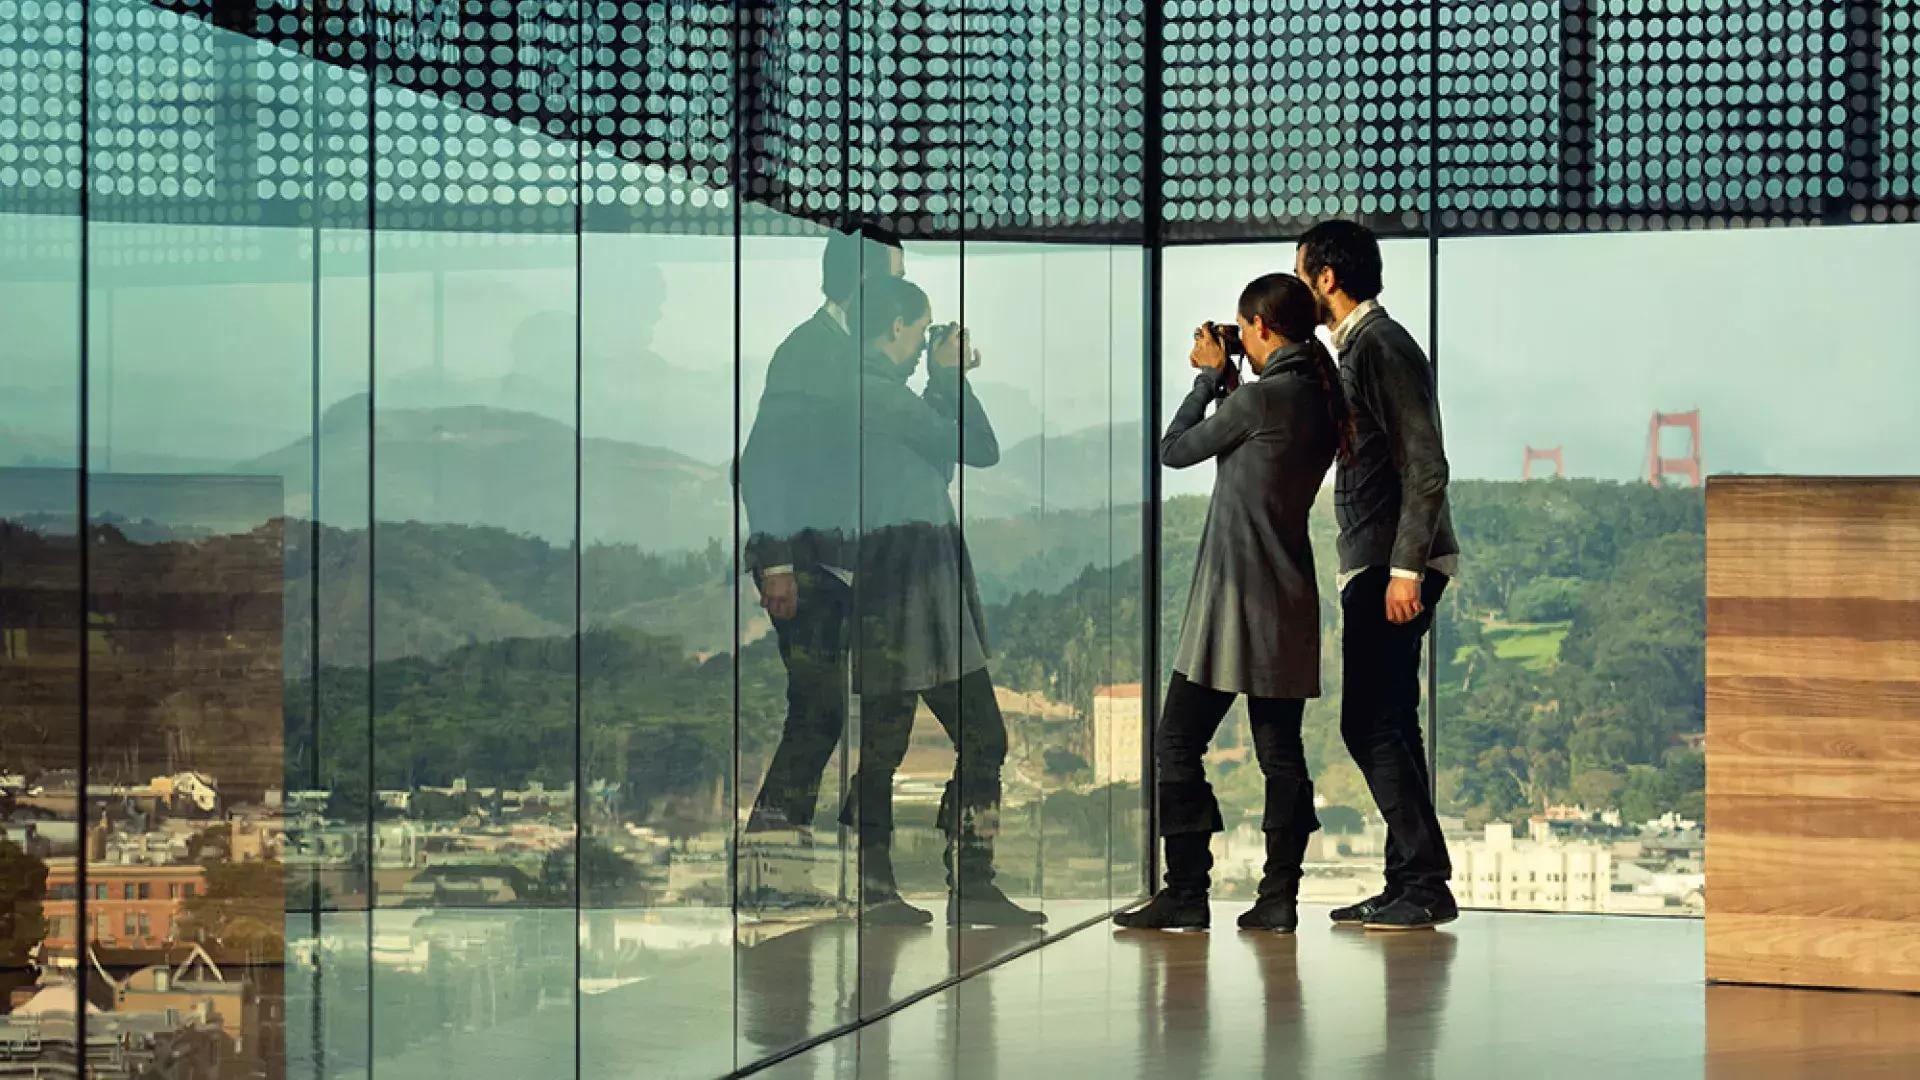 Two people peer through glass walls at the de Young Museum in San Francisco.